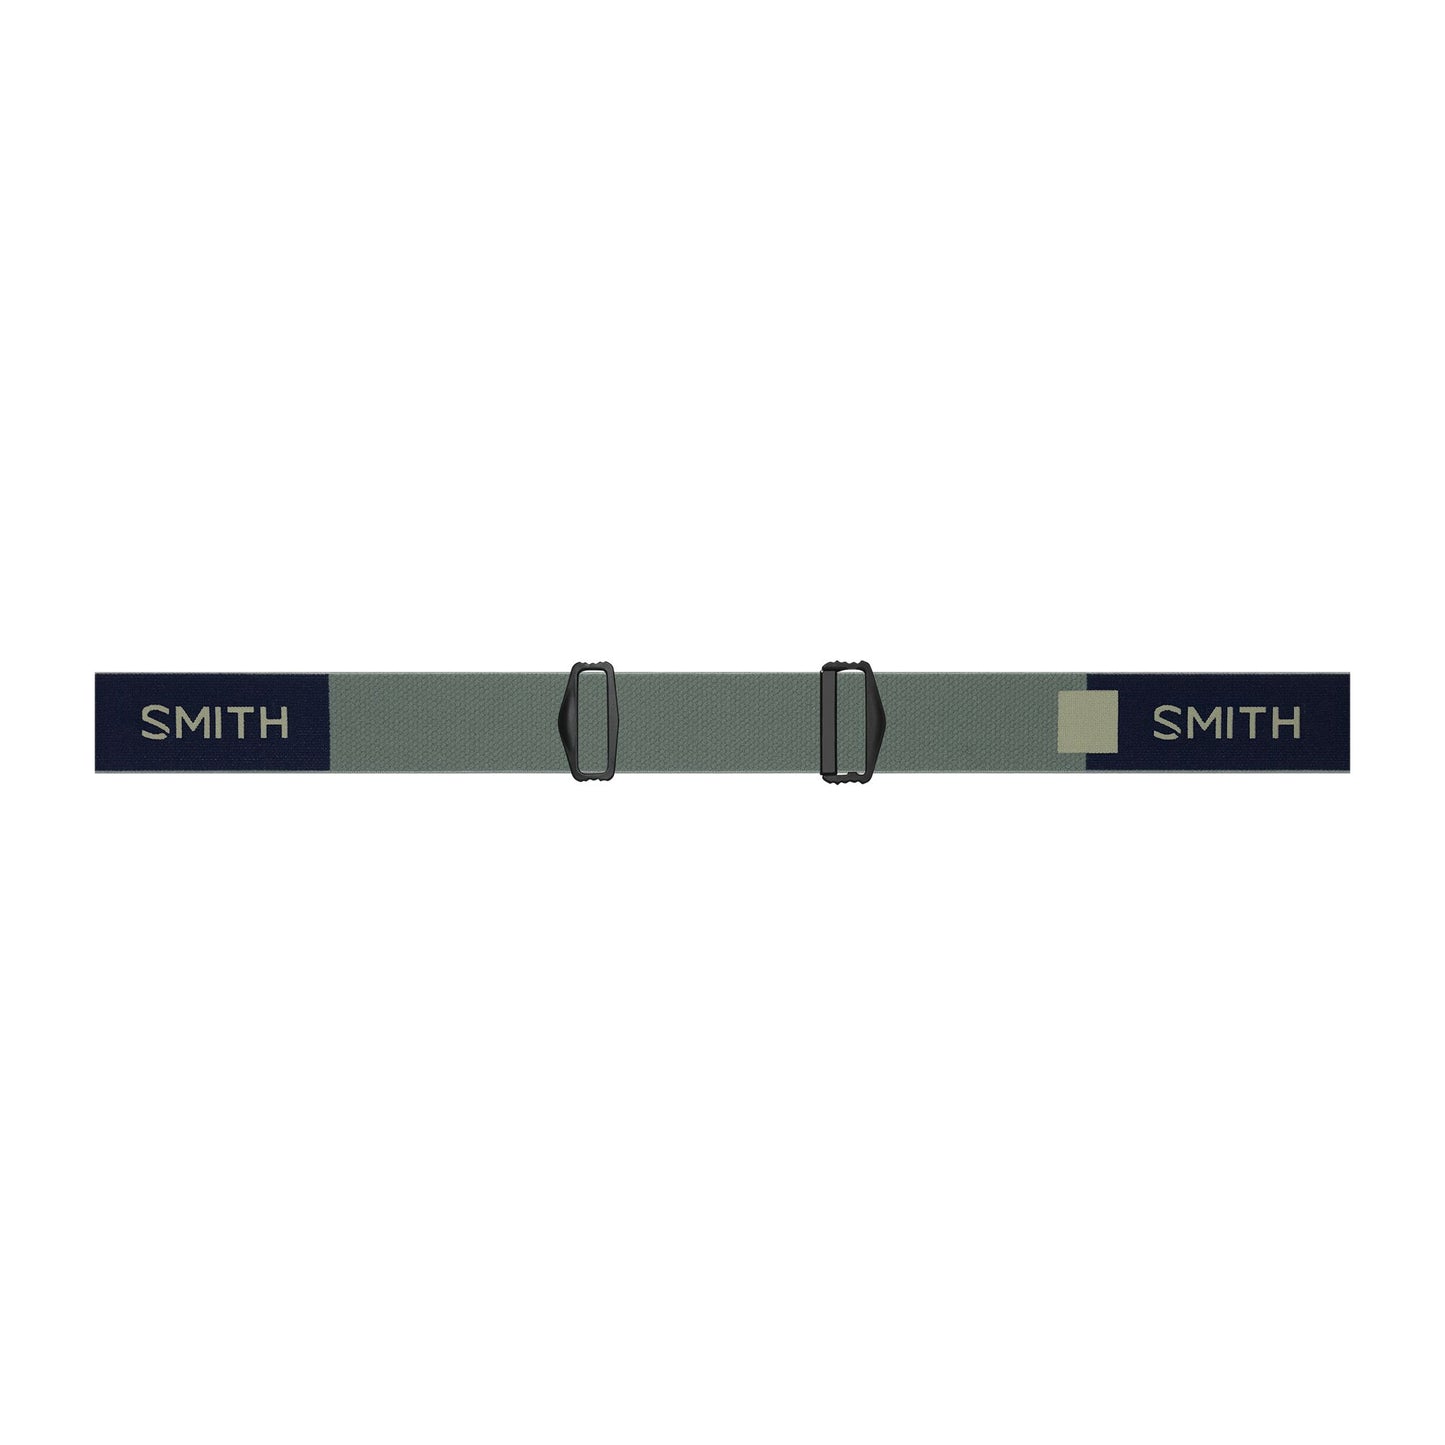 Smith Squad MTB Goggles - One Size Fits Most - Midnight Navy - Sage Brush - ChromaPop Contrast Rose Flash Lens